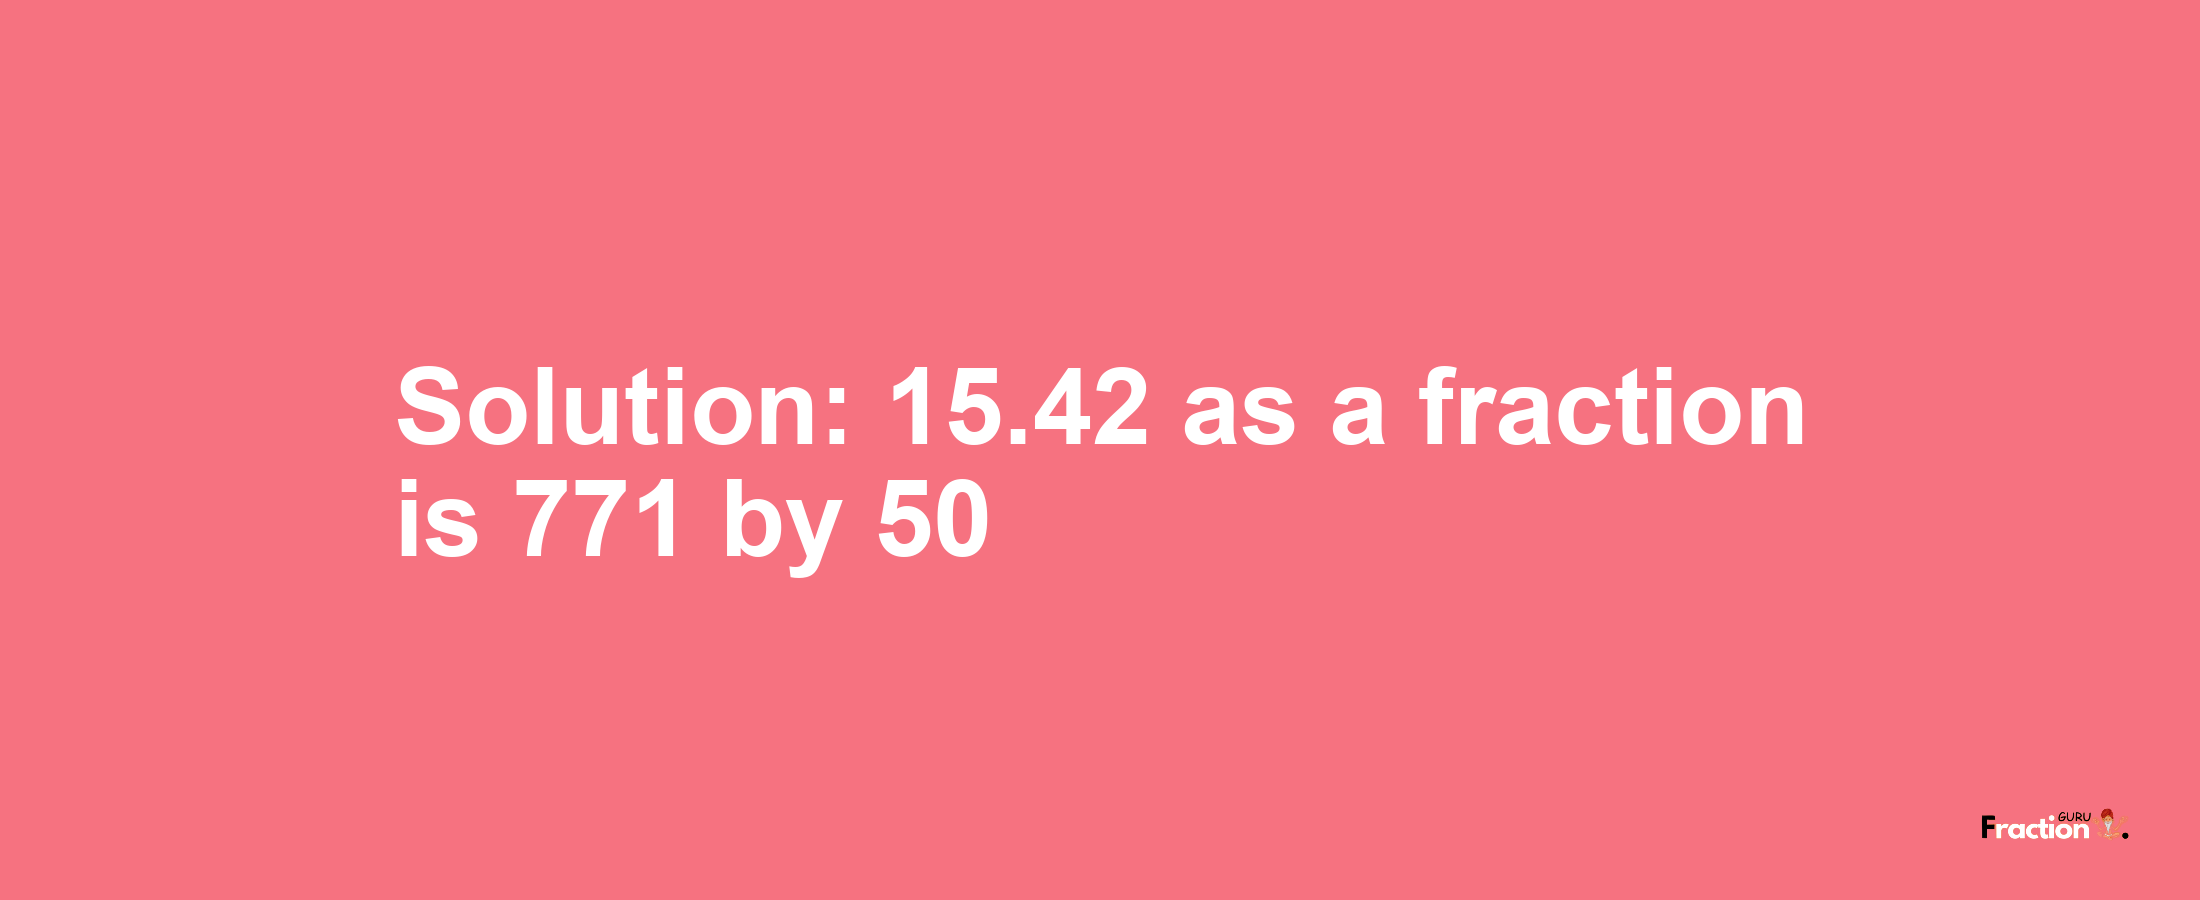 Solution:15.42 as a fraction is 771/50